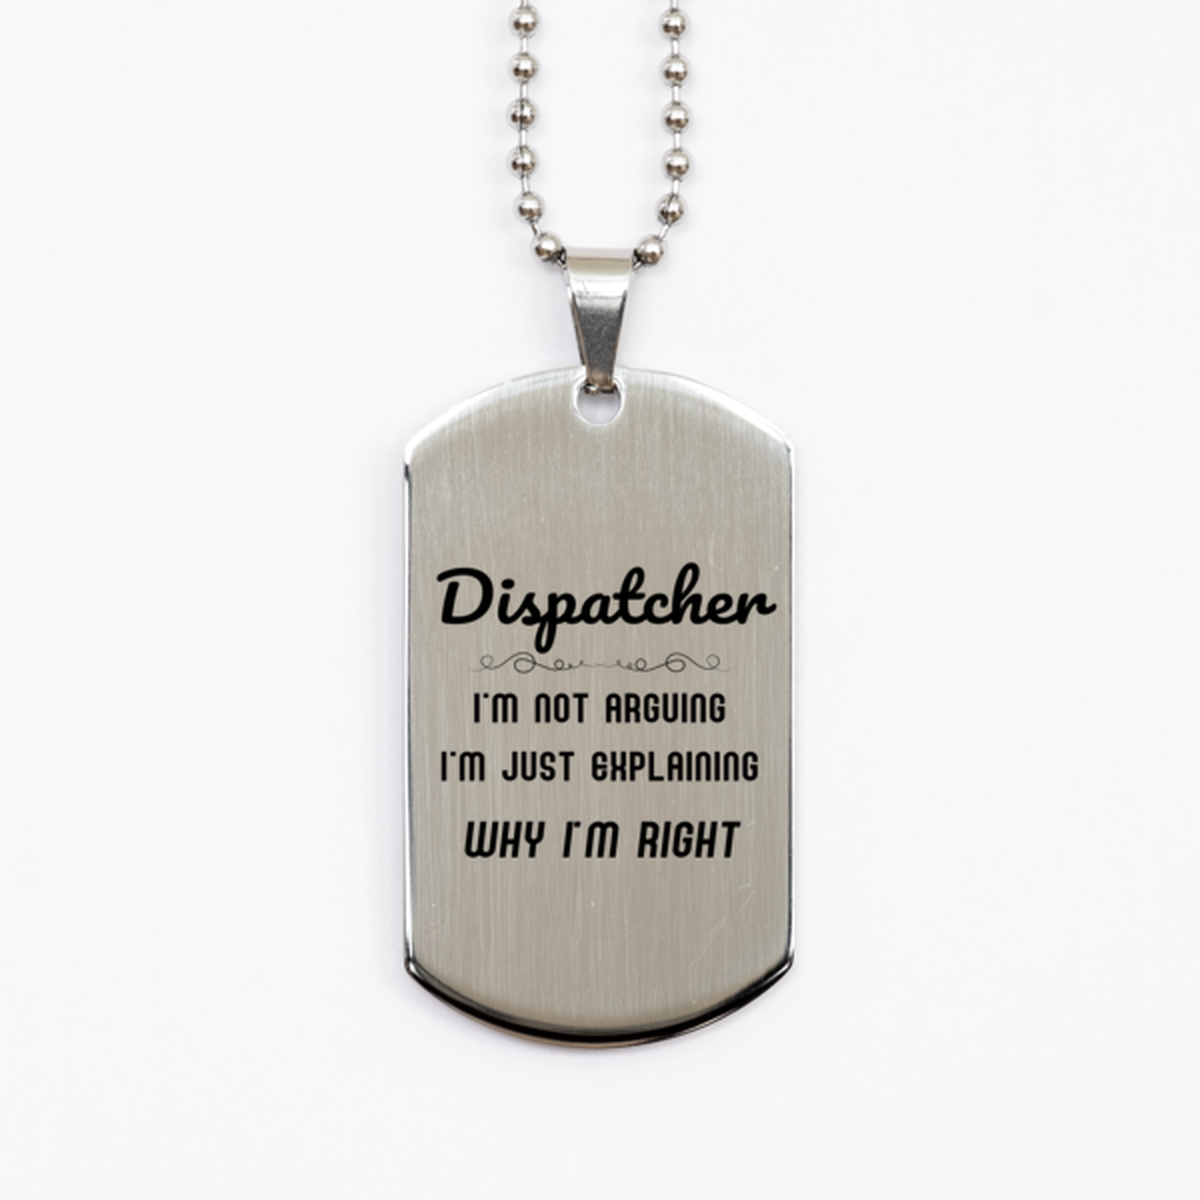 Dispatcher I'm not Arguing. I'm Just Explaining Why I'm RIGHT Silver Dog Tag, Funny Saying Quote Dispatcher Gifts For Dispatcher Graduation Birthday Christmas Gifts for Men Women Coworker